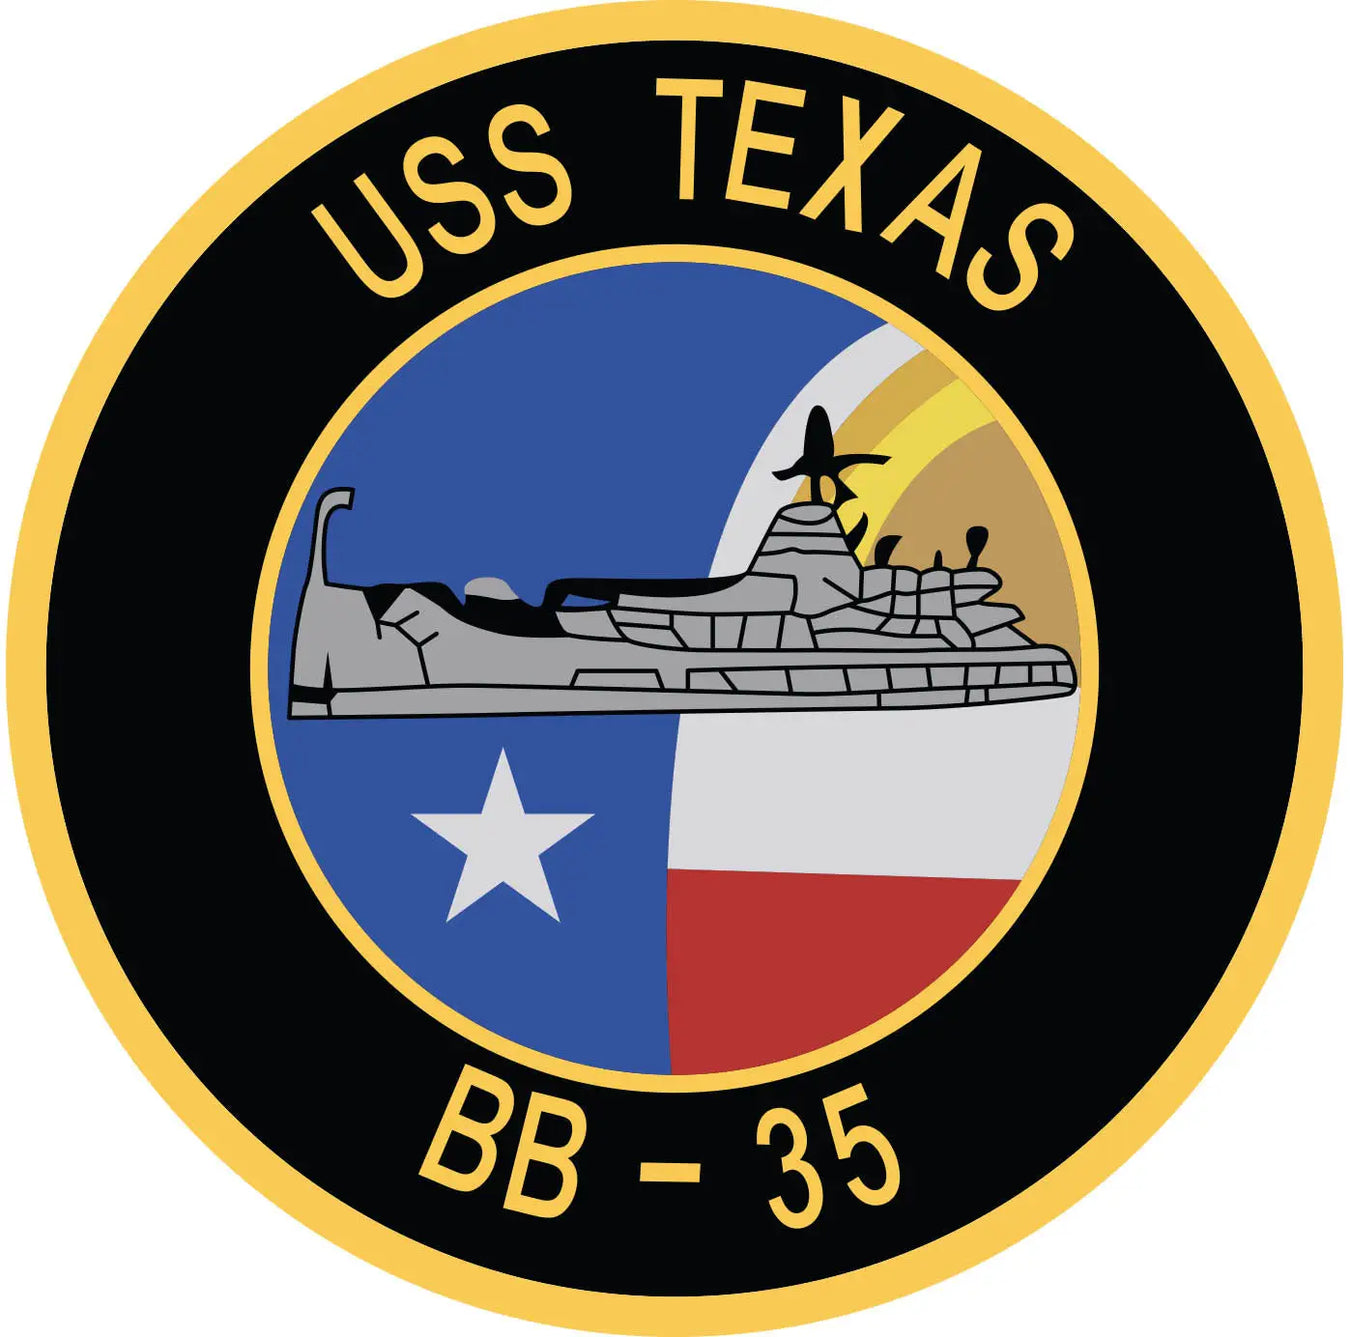 USS Texas (BB-35) Merchandise - Shop T-Shirts, hoodies, patches, pins, flags, decals, hats and more.